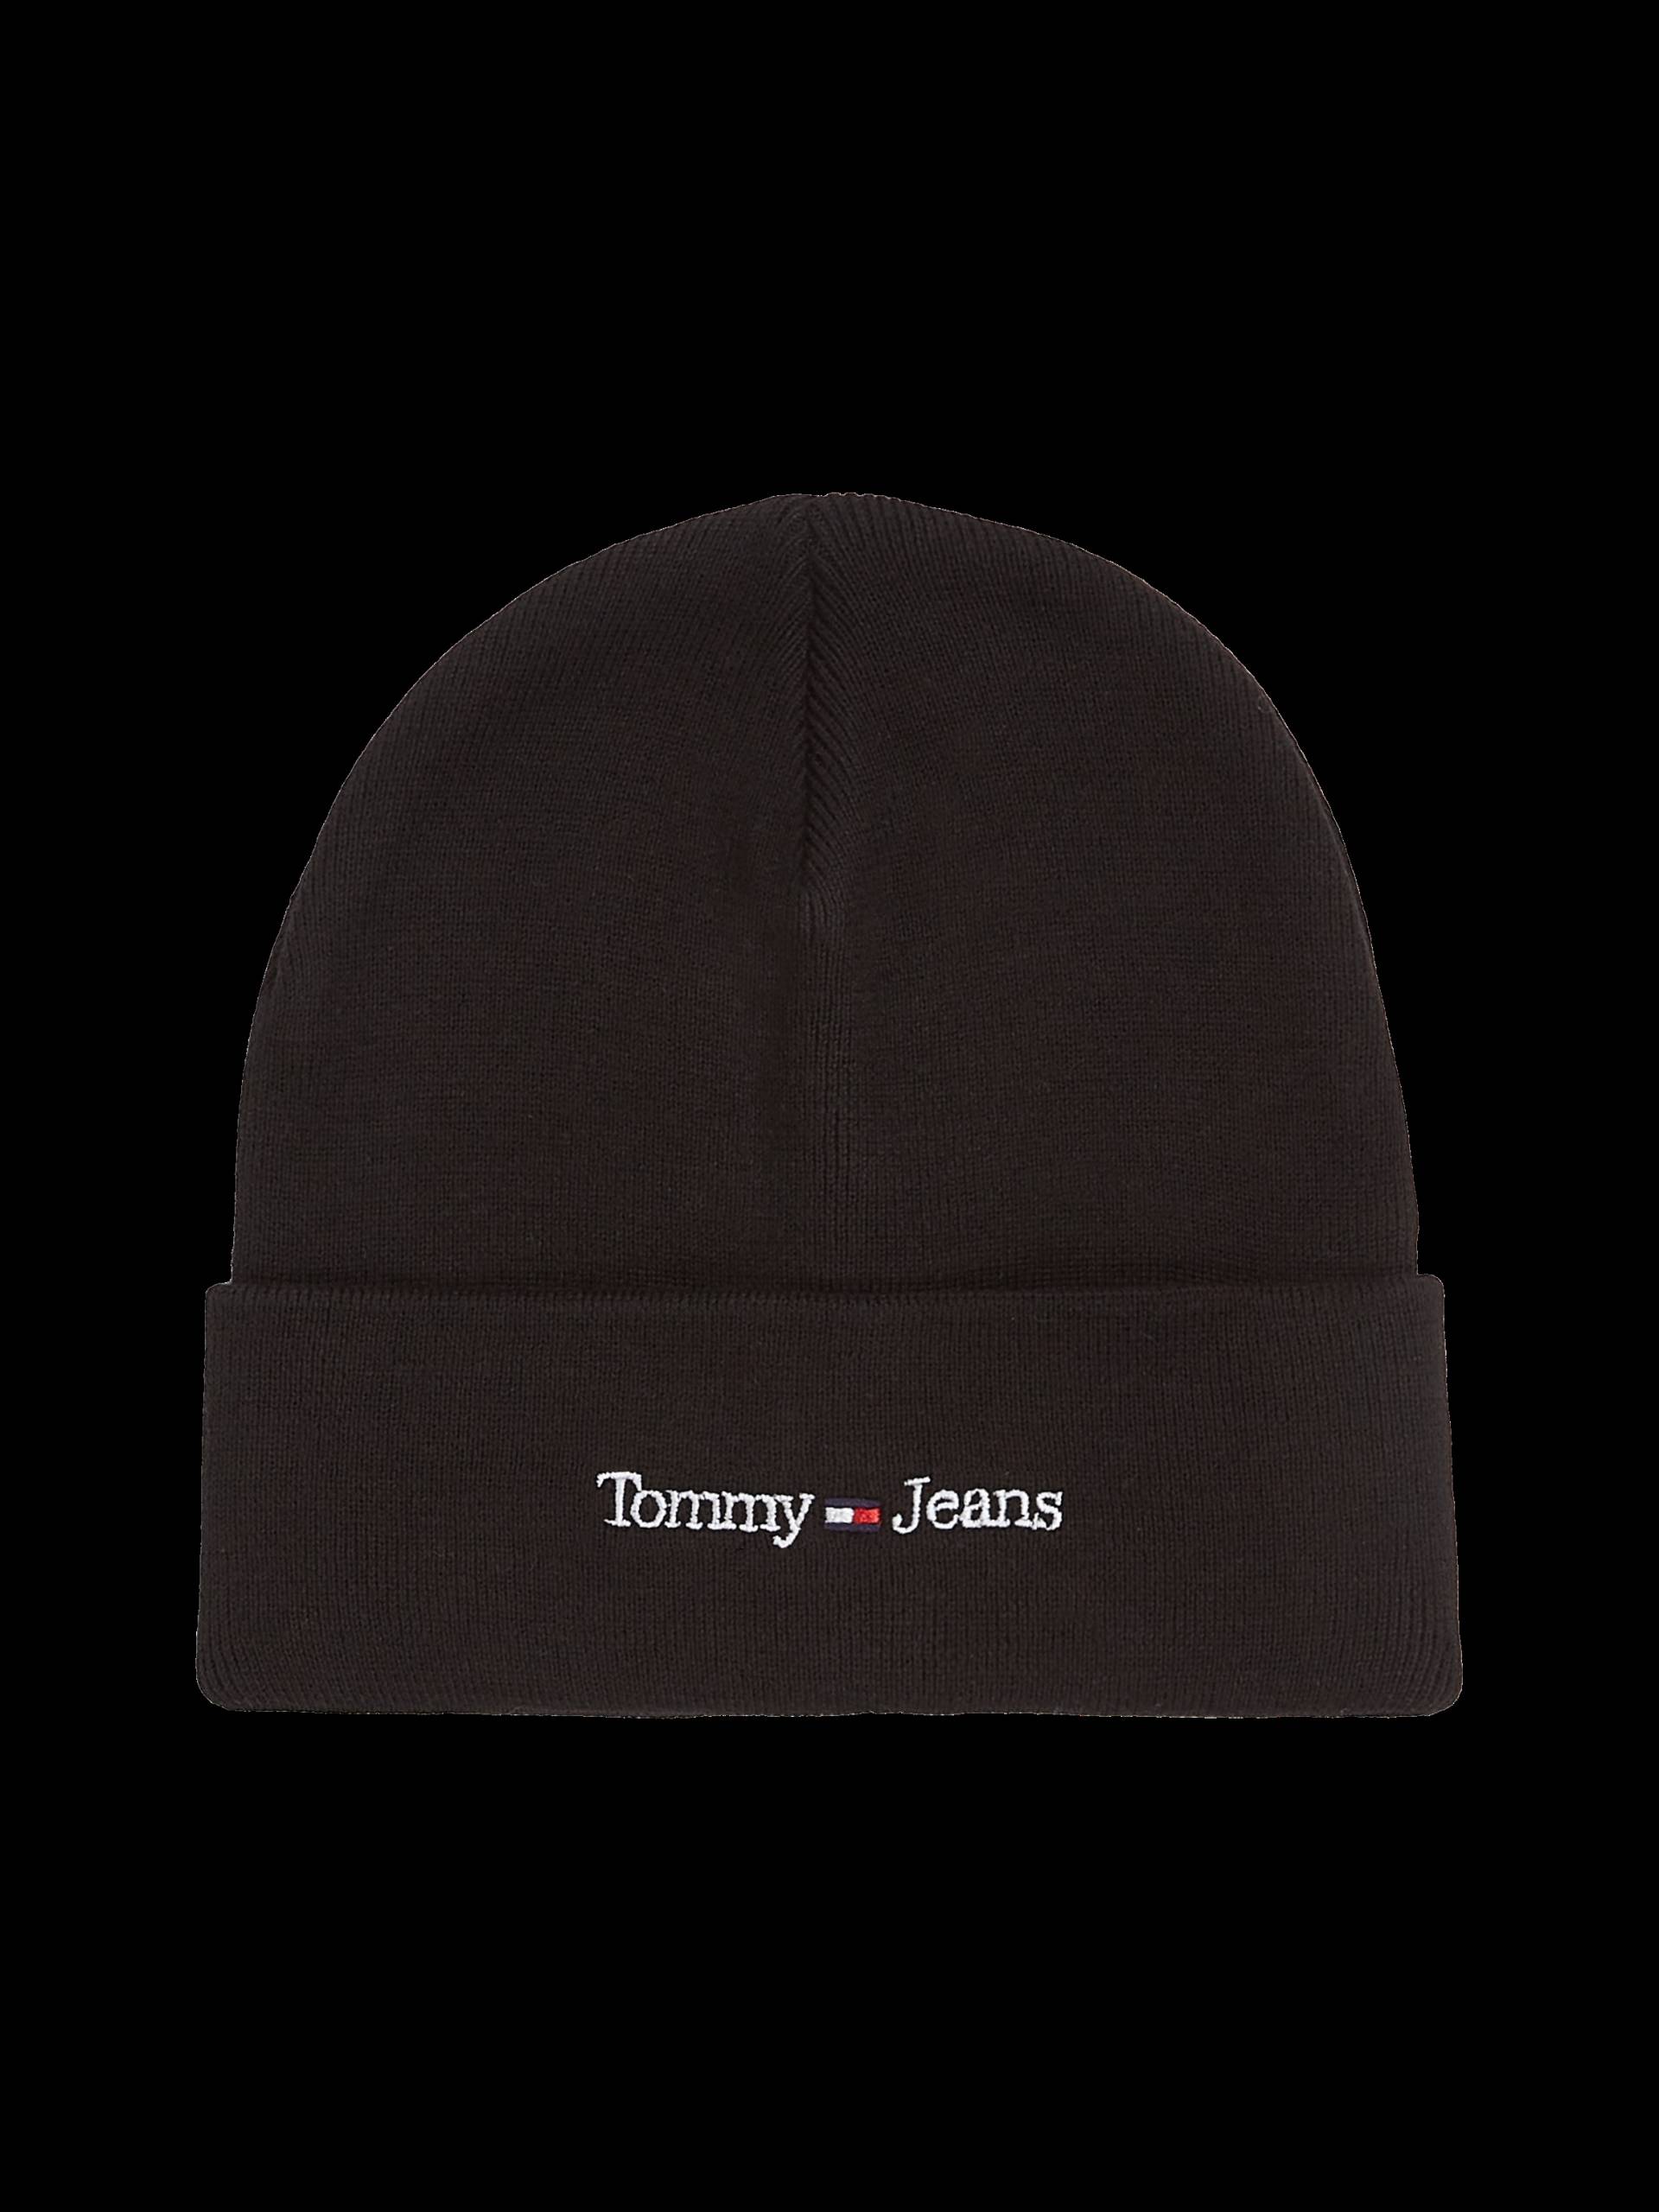 Tommy Jeans Beanie von TOMMY JEANS